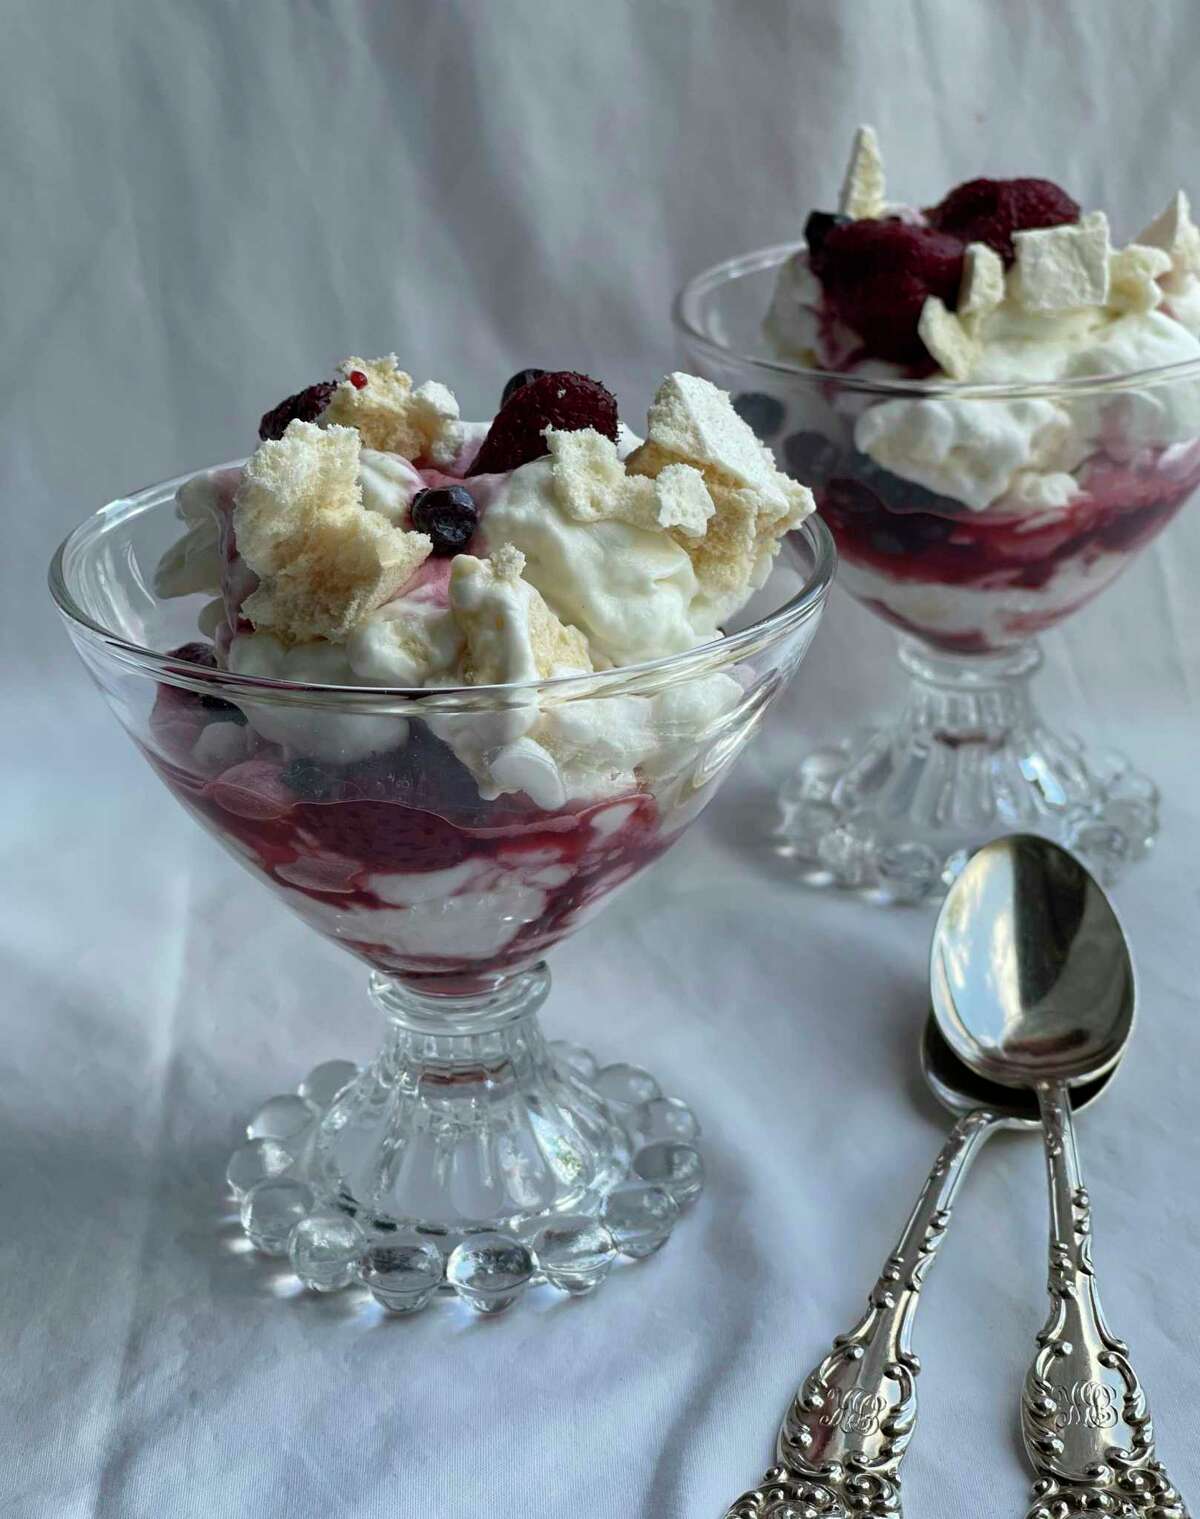 Make this red, white & blueberry dessert for a festive Fourth of July treat